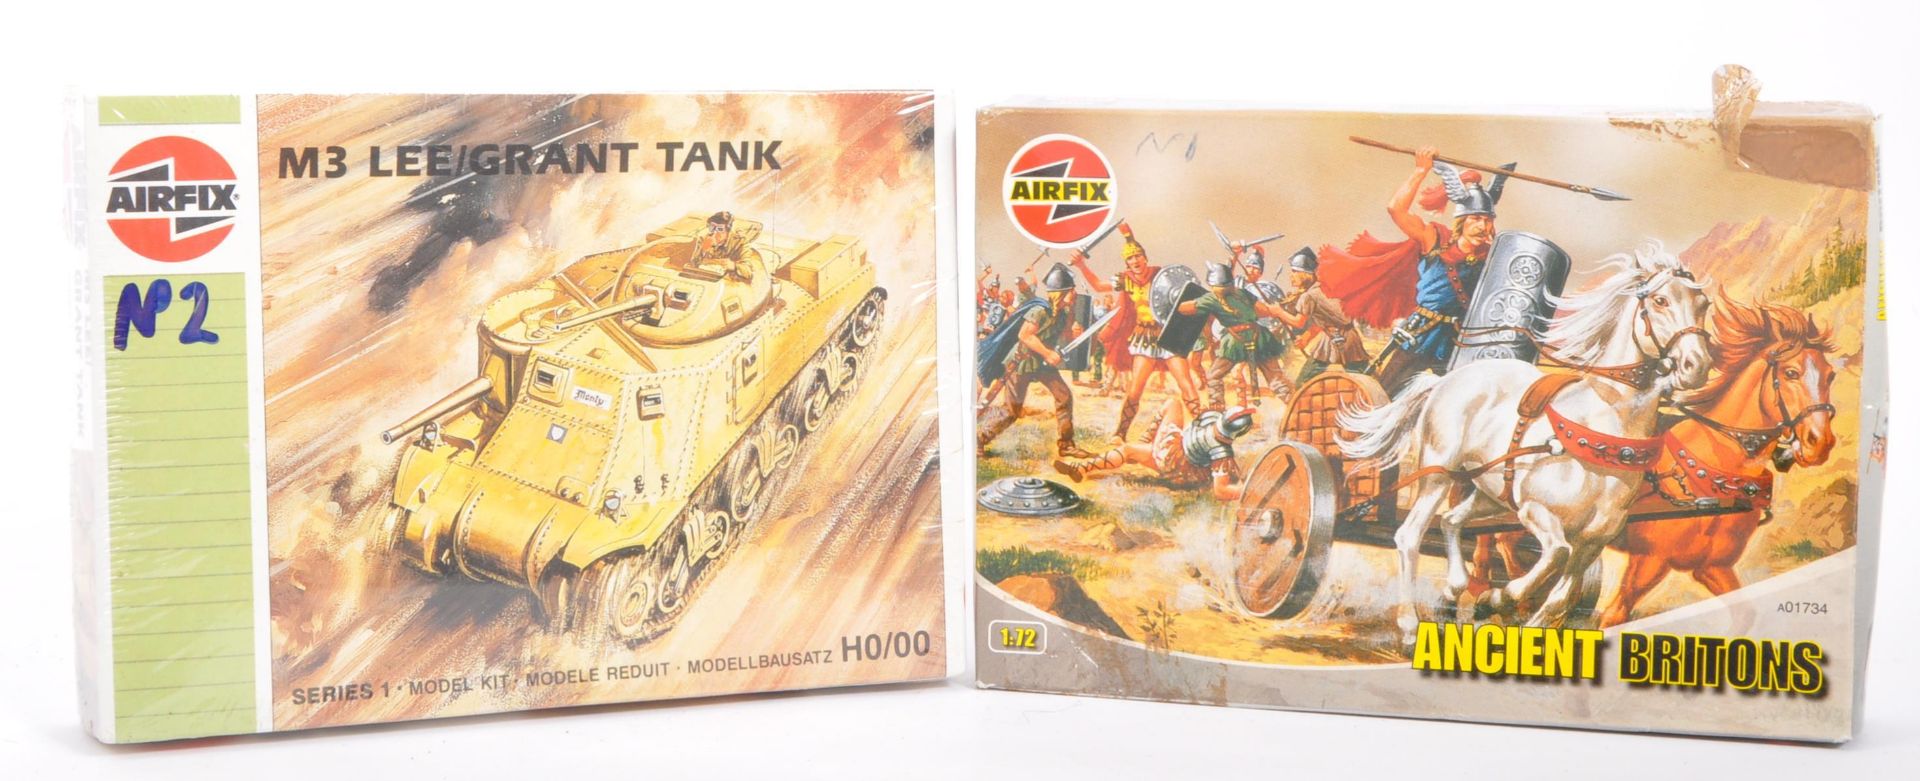 MODEL KITS - COLLECTION OF AIRFIX PLASTIC MODEL KITS - Image 6 of 6